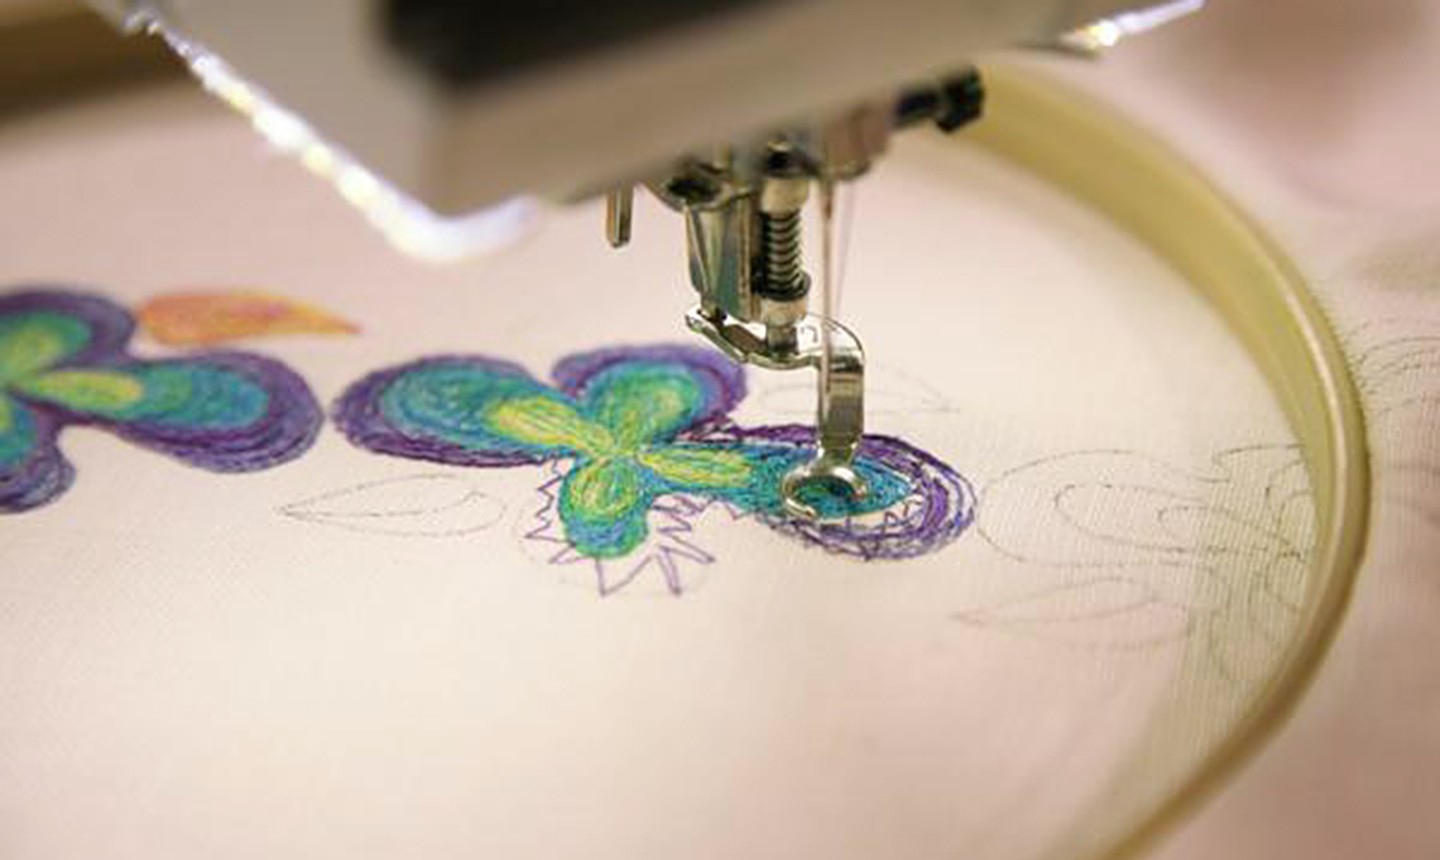 Embroidery Machine Patterns Designs How To Free Motion Machine Embroider